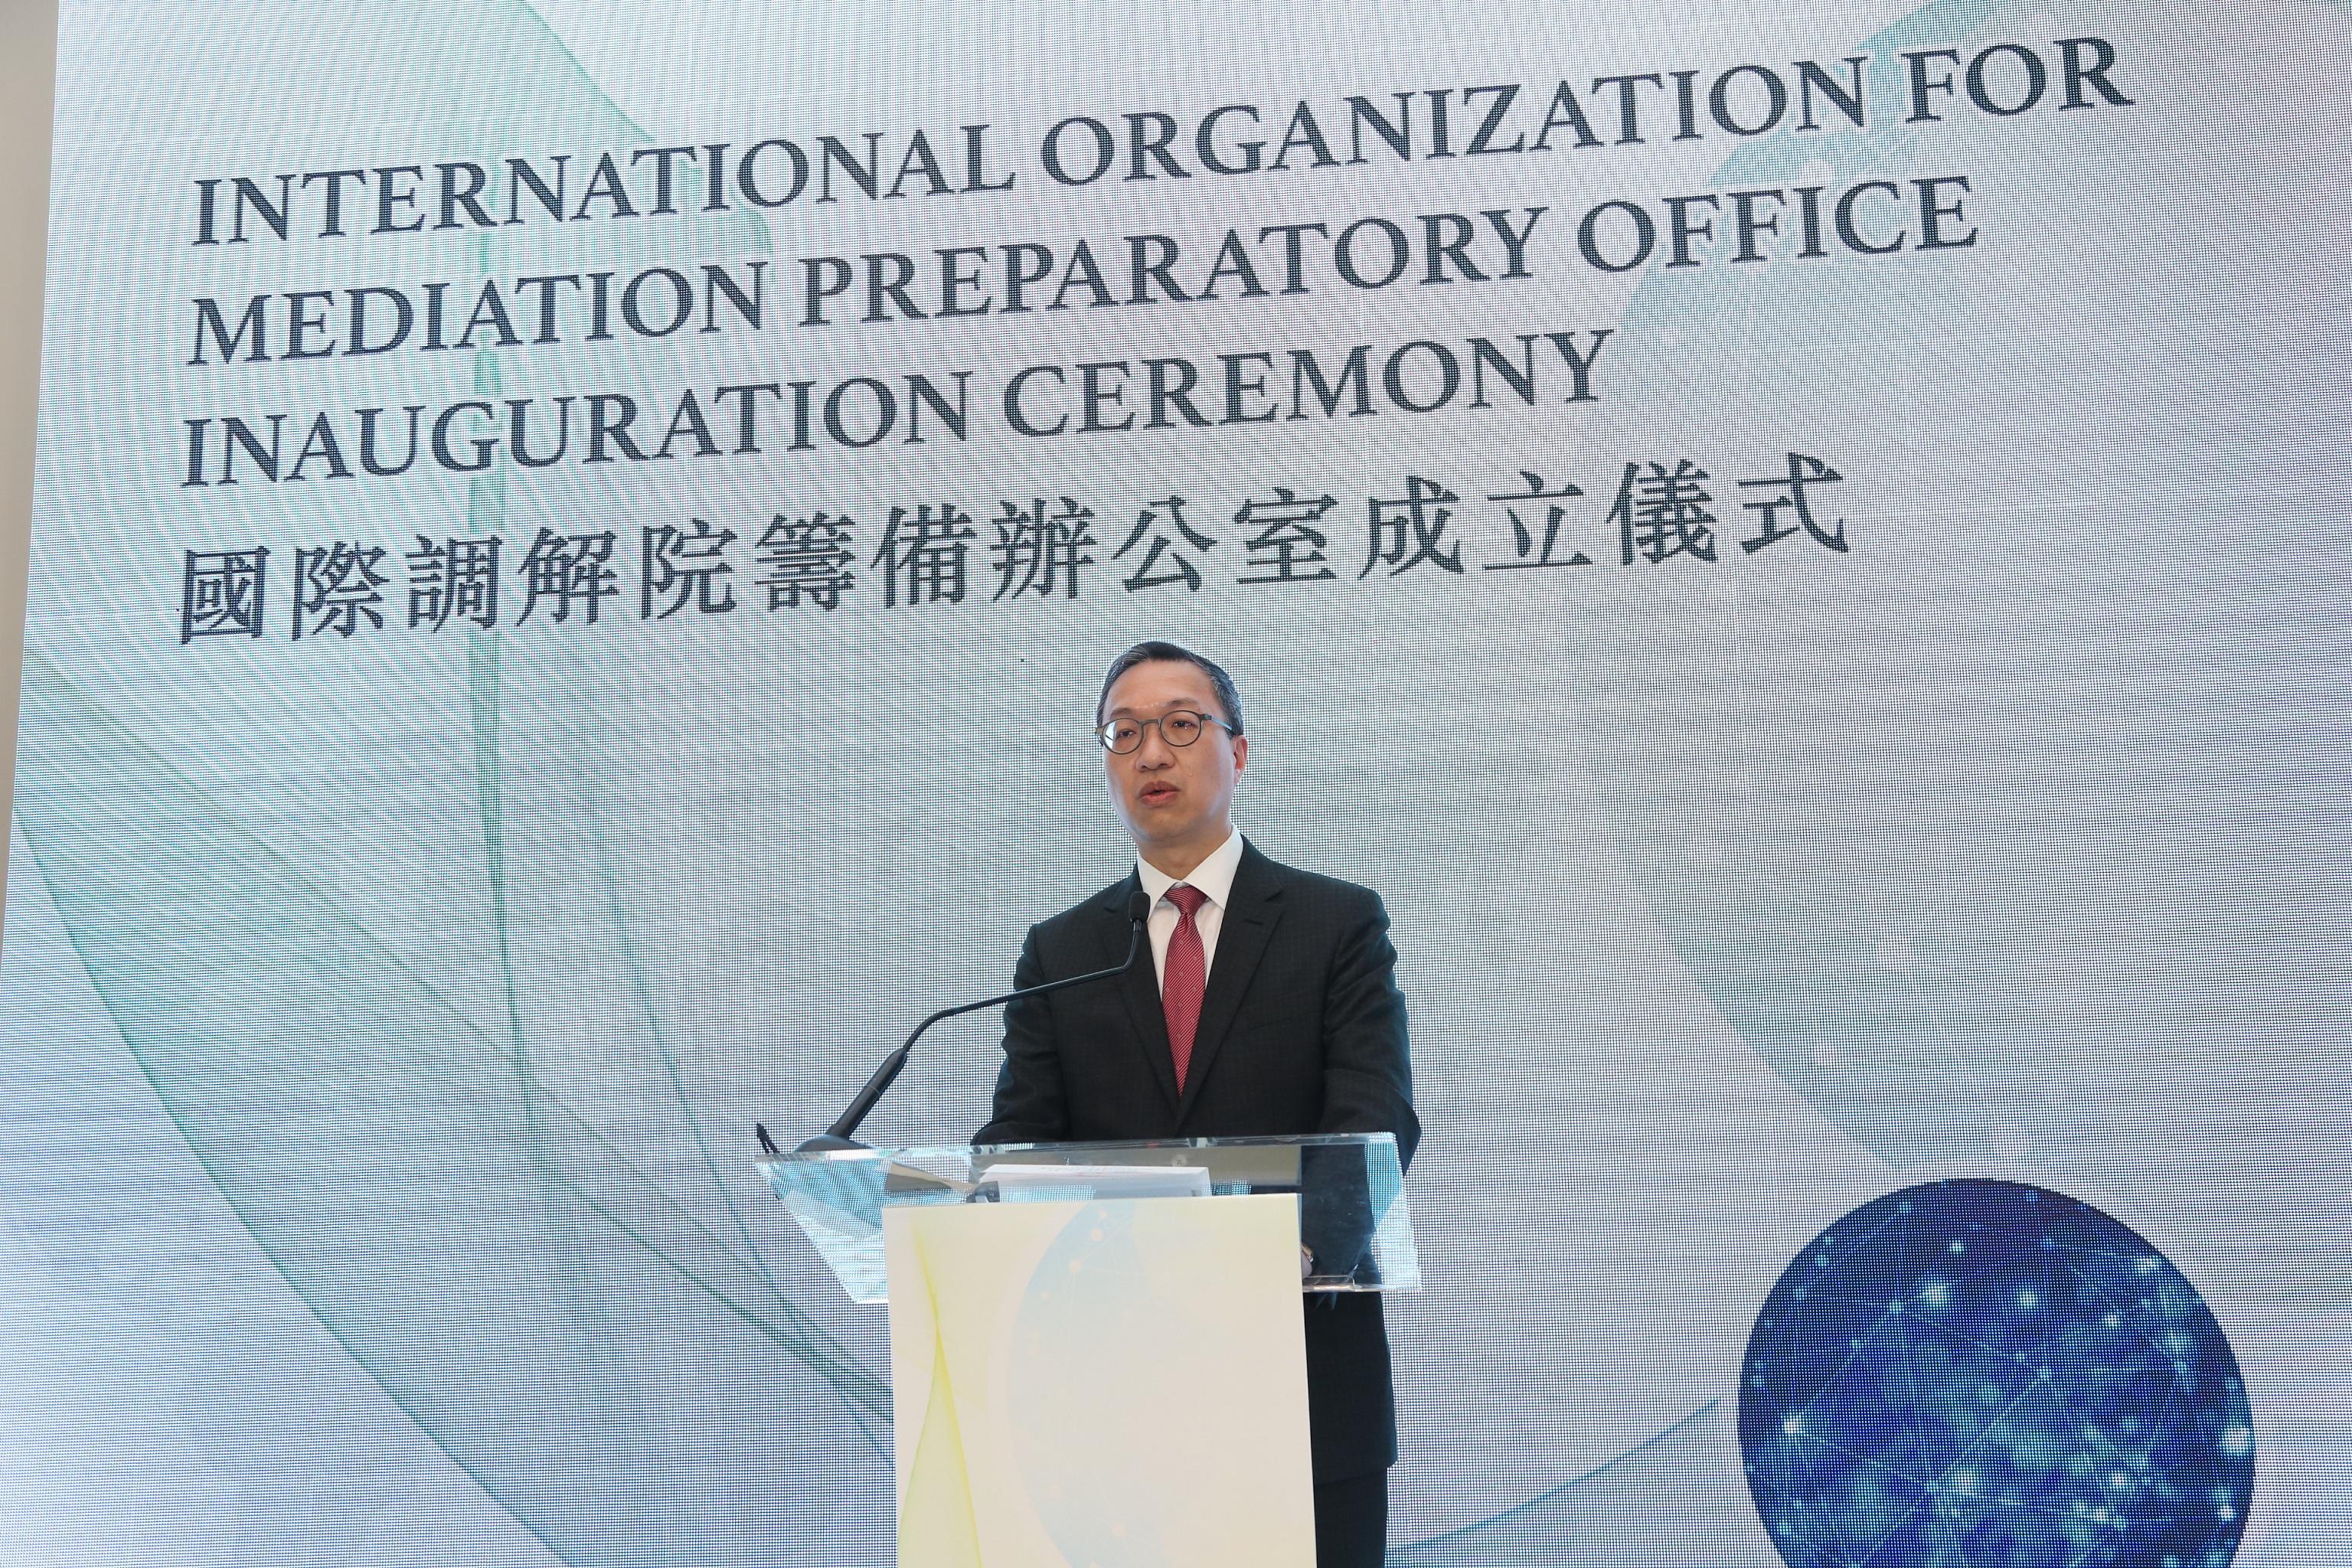 With strong support from the Central People's Government, the inauguration ceremony for the International Organization for Mediation Preparatory Office was held today (February 16) at the Hong Kong Legal Hub. Photo shows the Secretary for Justice, Mr Paul Lam, SC, delivering a speech at the ceremony.